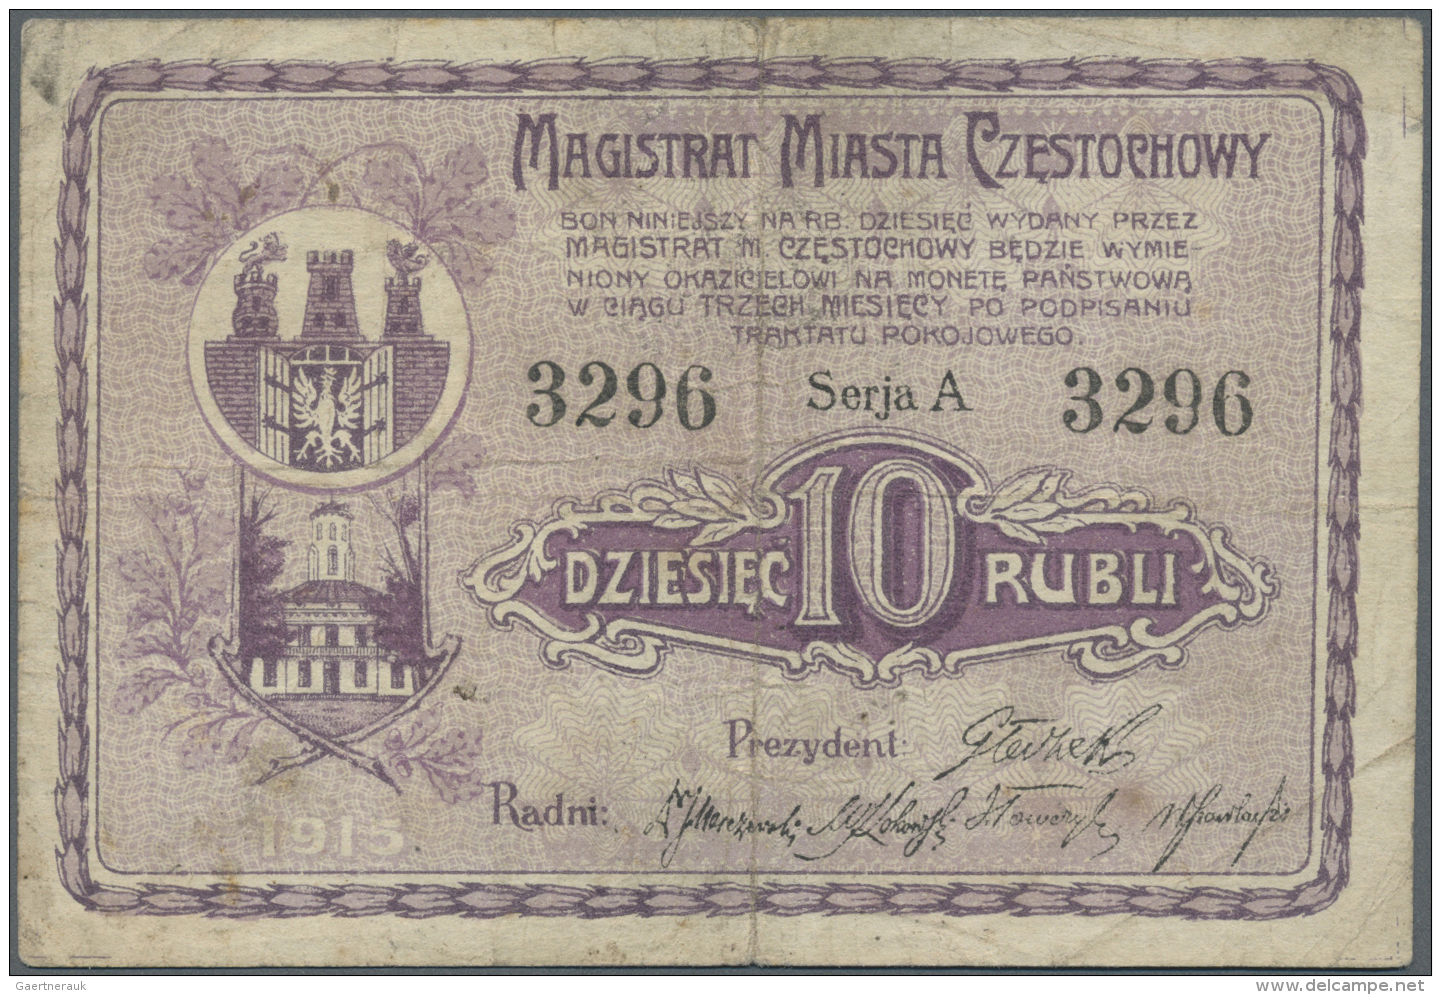 Poland / Polen: 10 Rubli 1915 K.19.19.2, Magistrat Miasta Czestochowy In Used Condition Wiht Folds And Stained Paper, Mi - Pologne